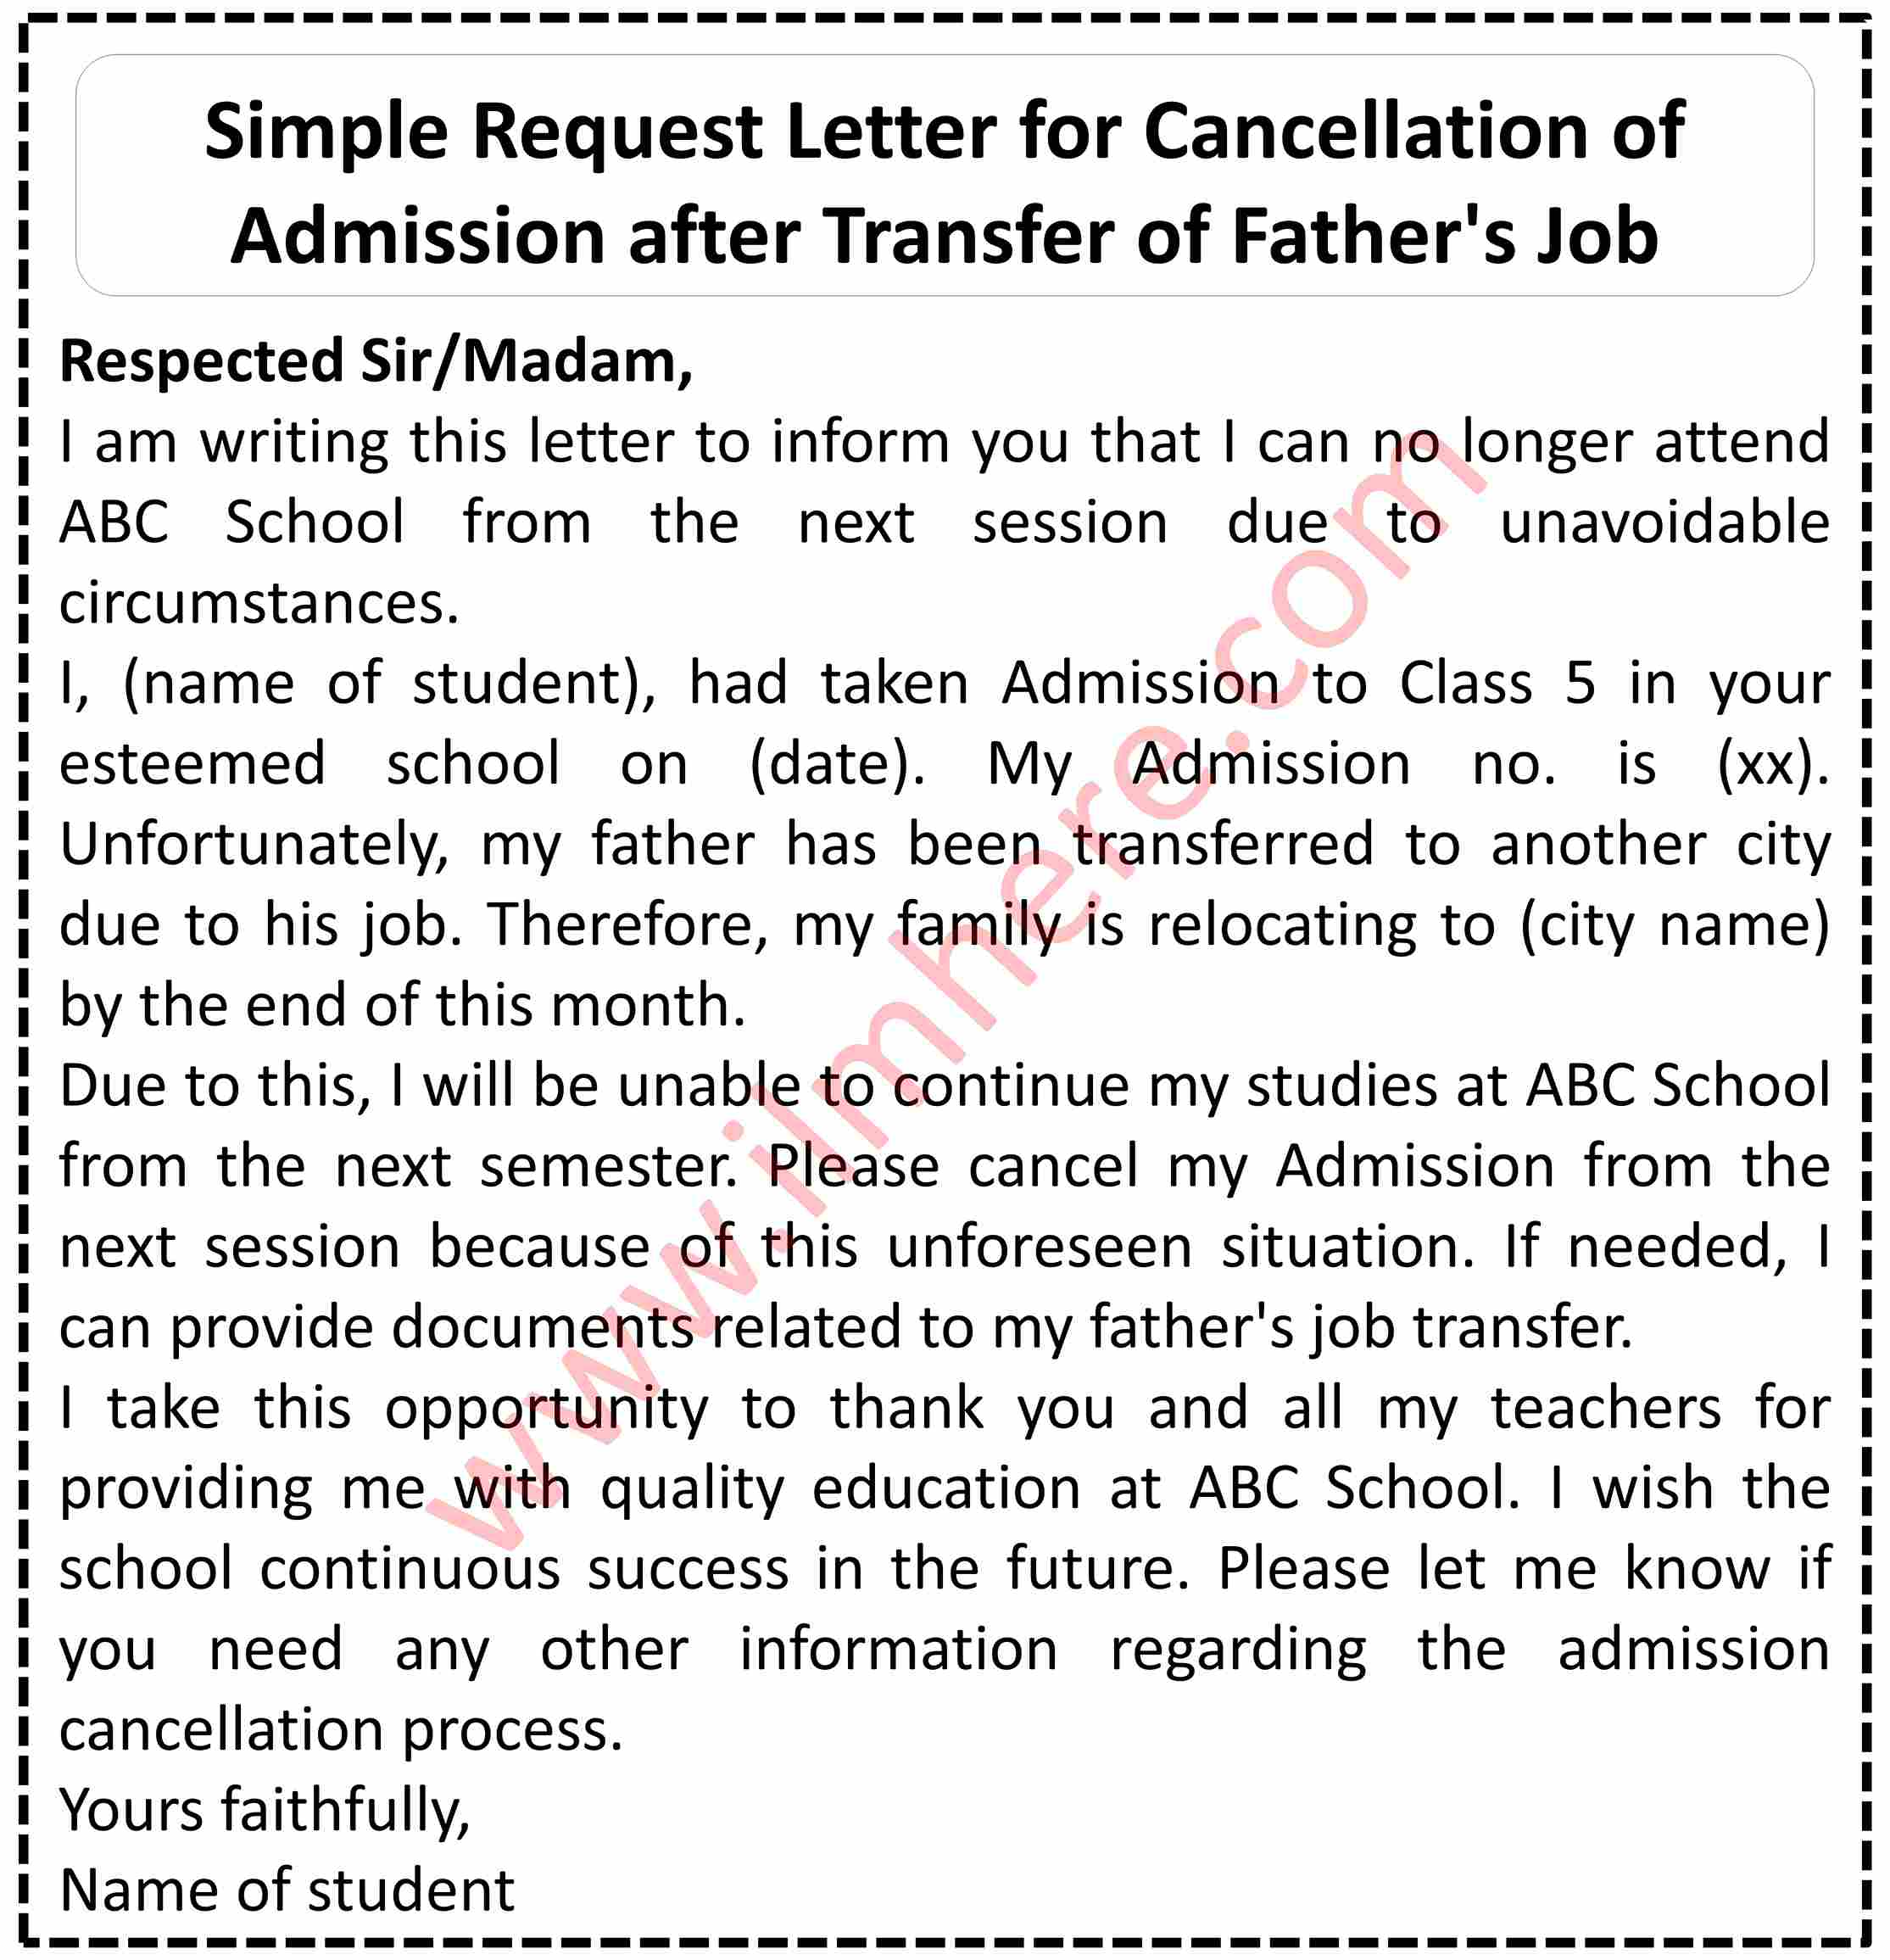 Simple Request Letter for Cancellation of Admission after Transfer of Father's Job